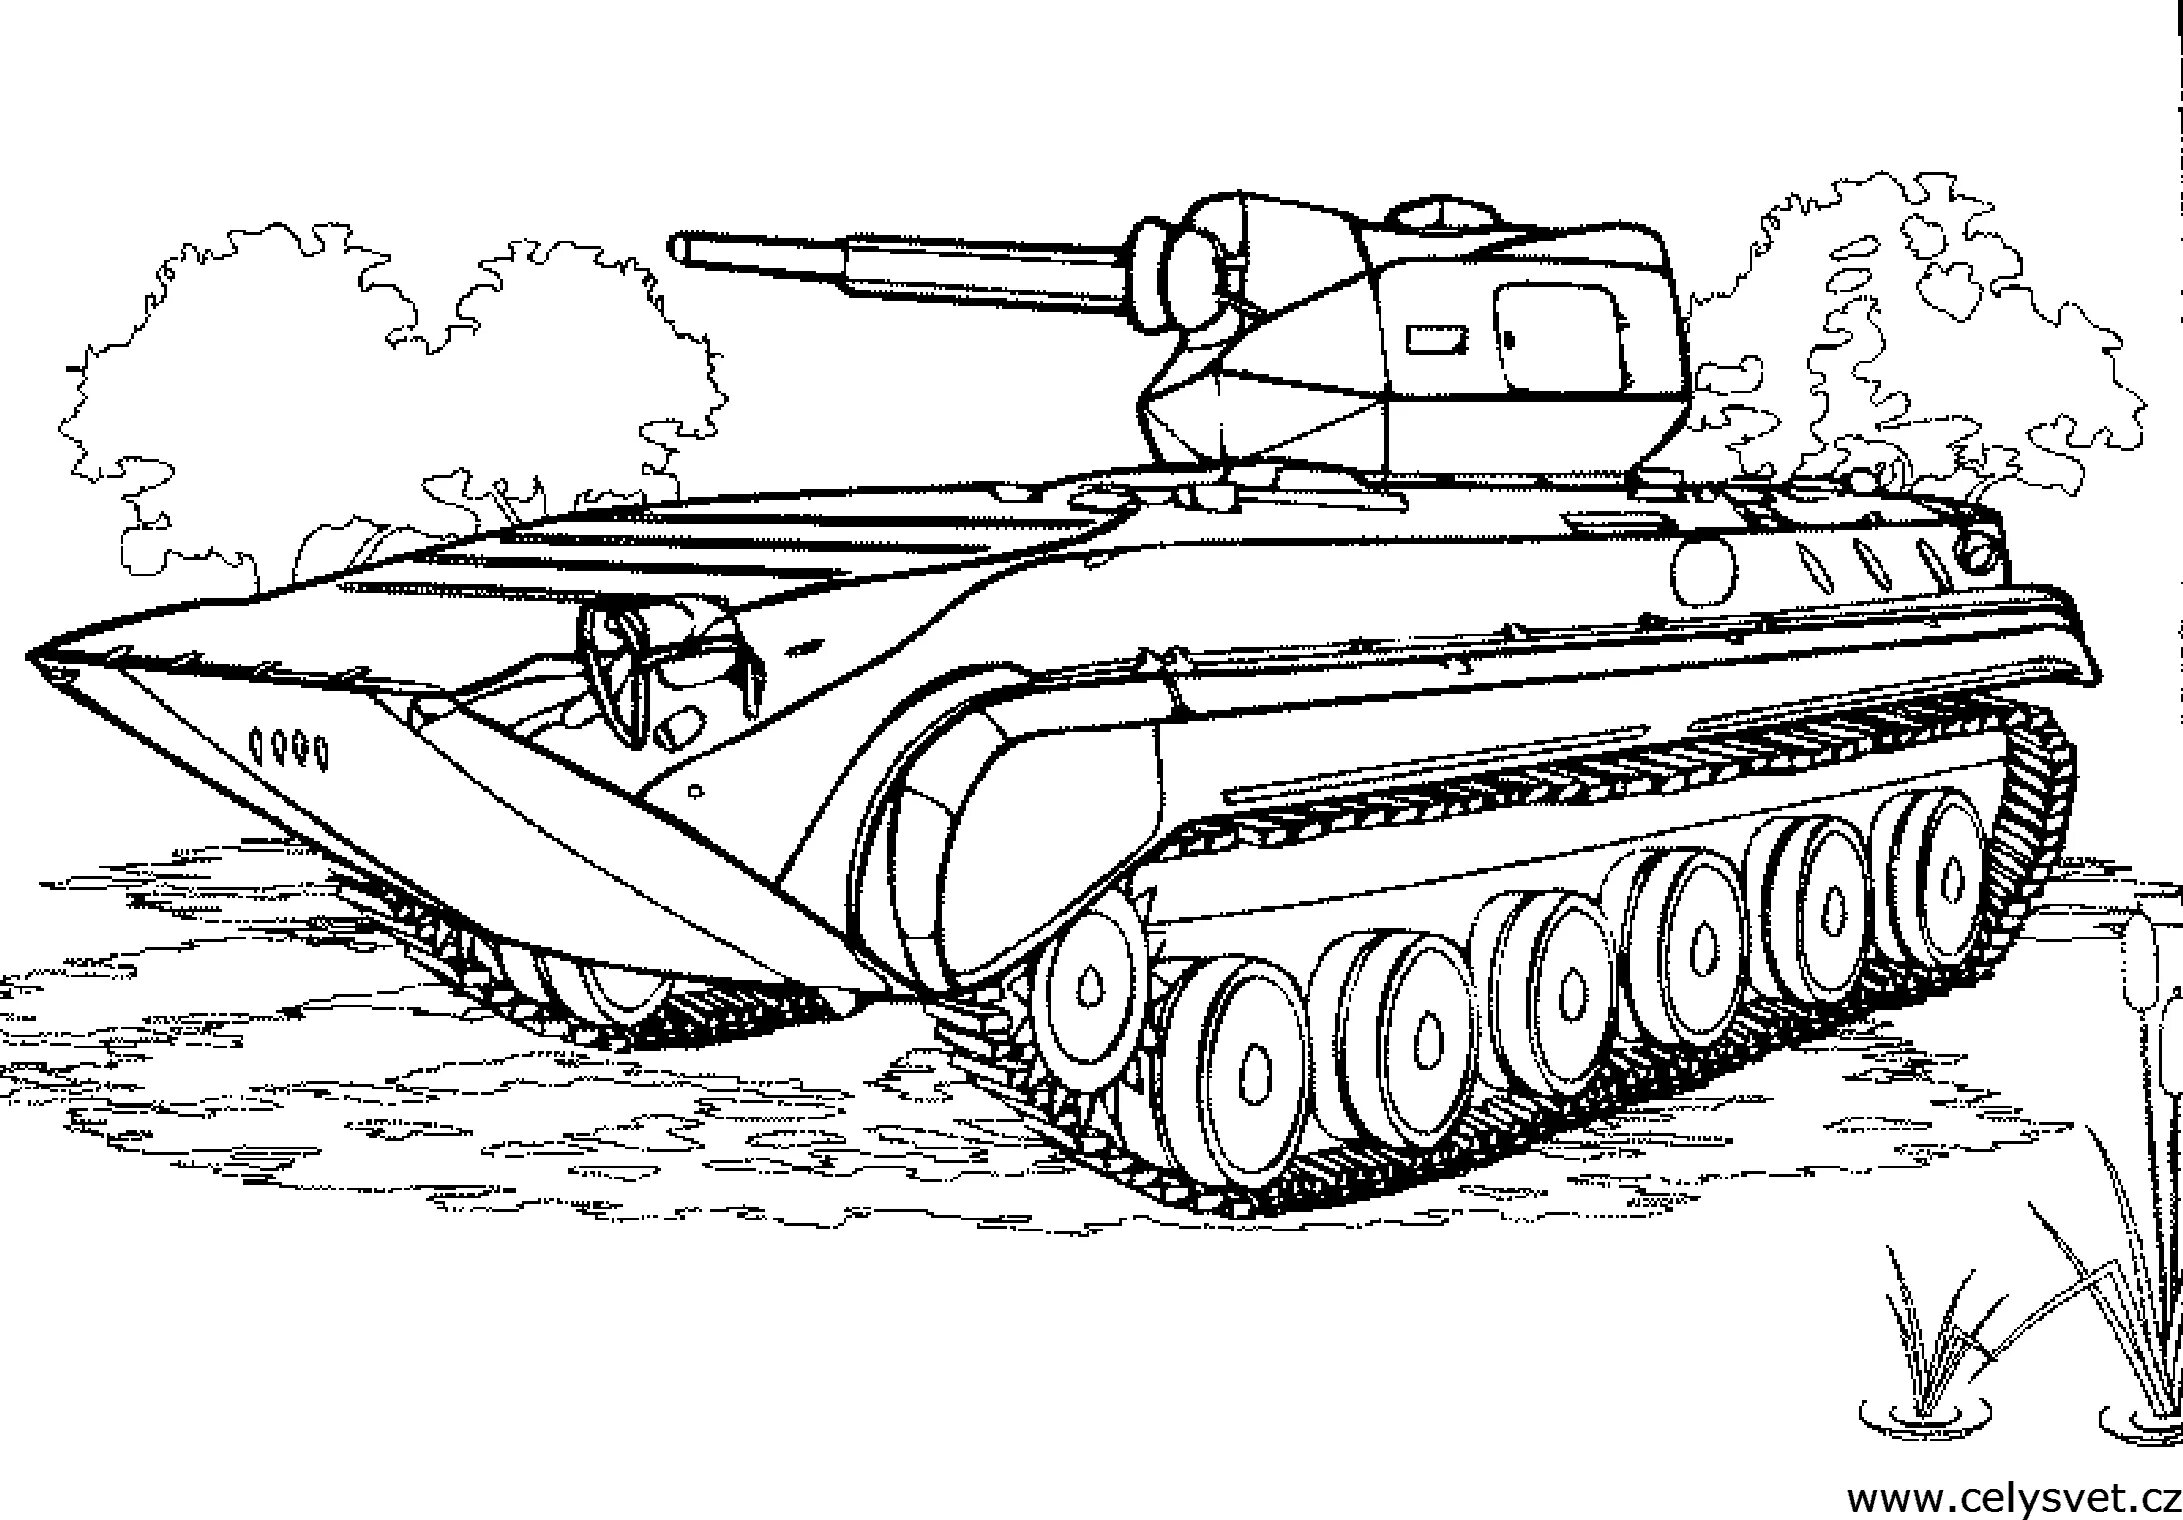 Coloring book exciting Russian tanks